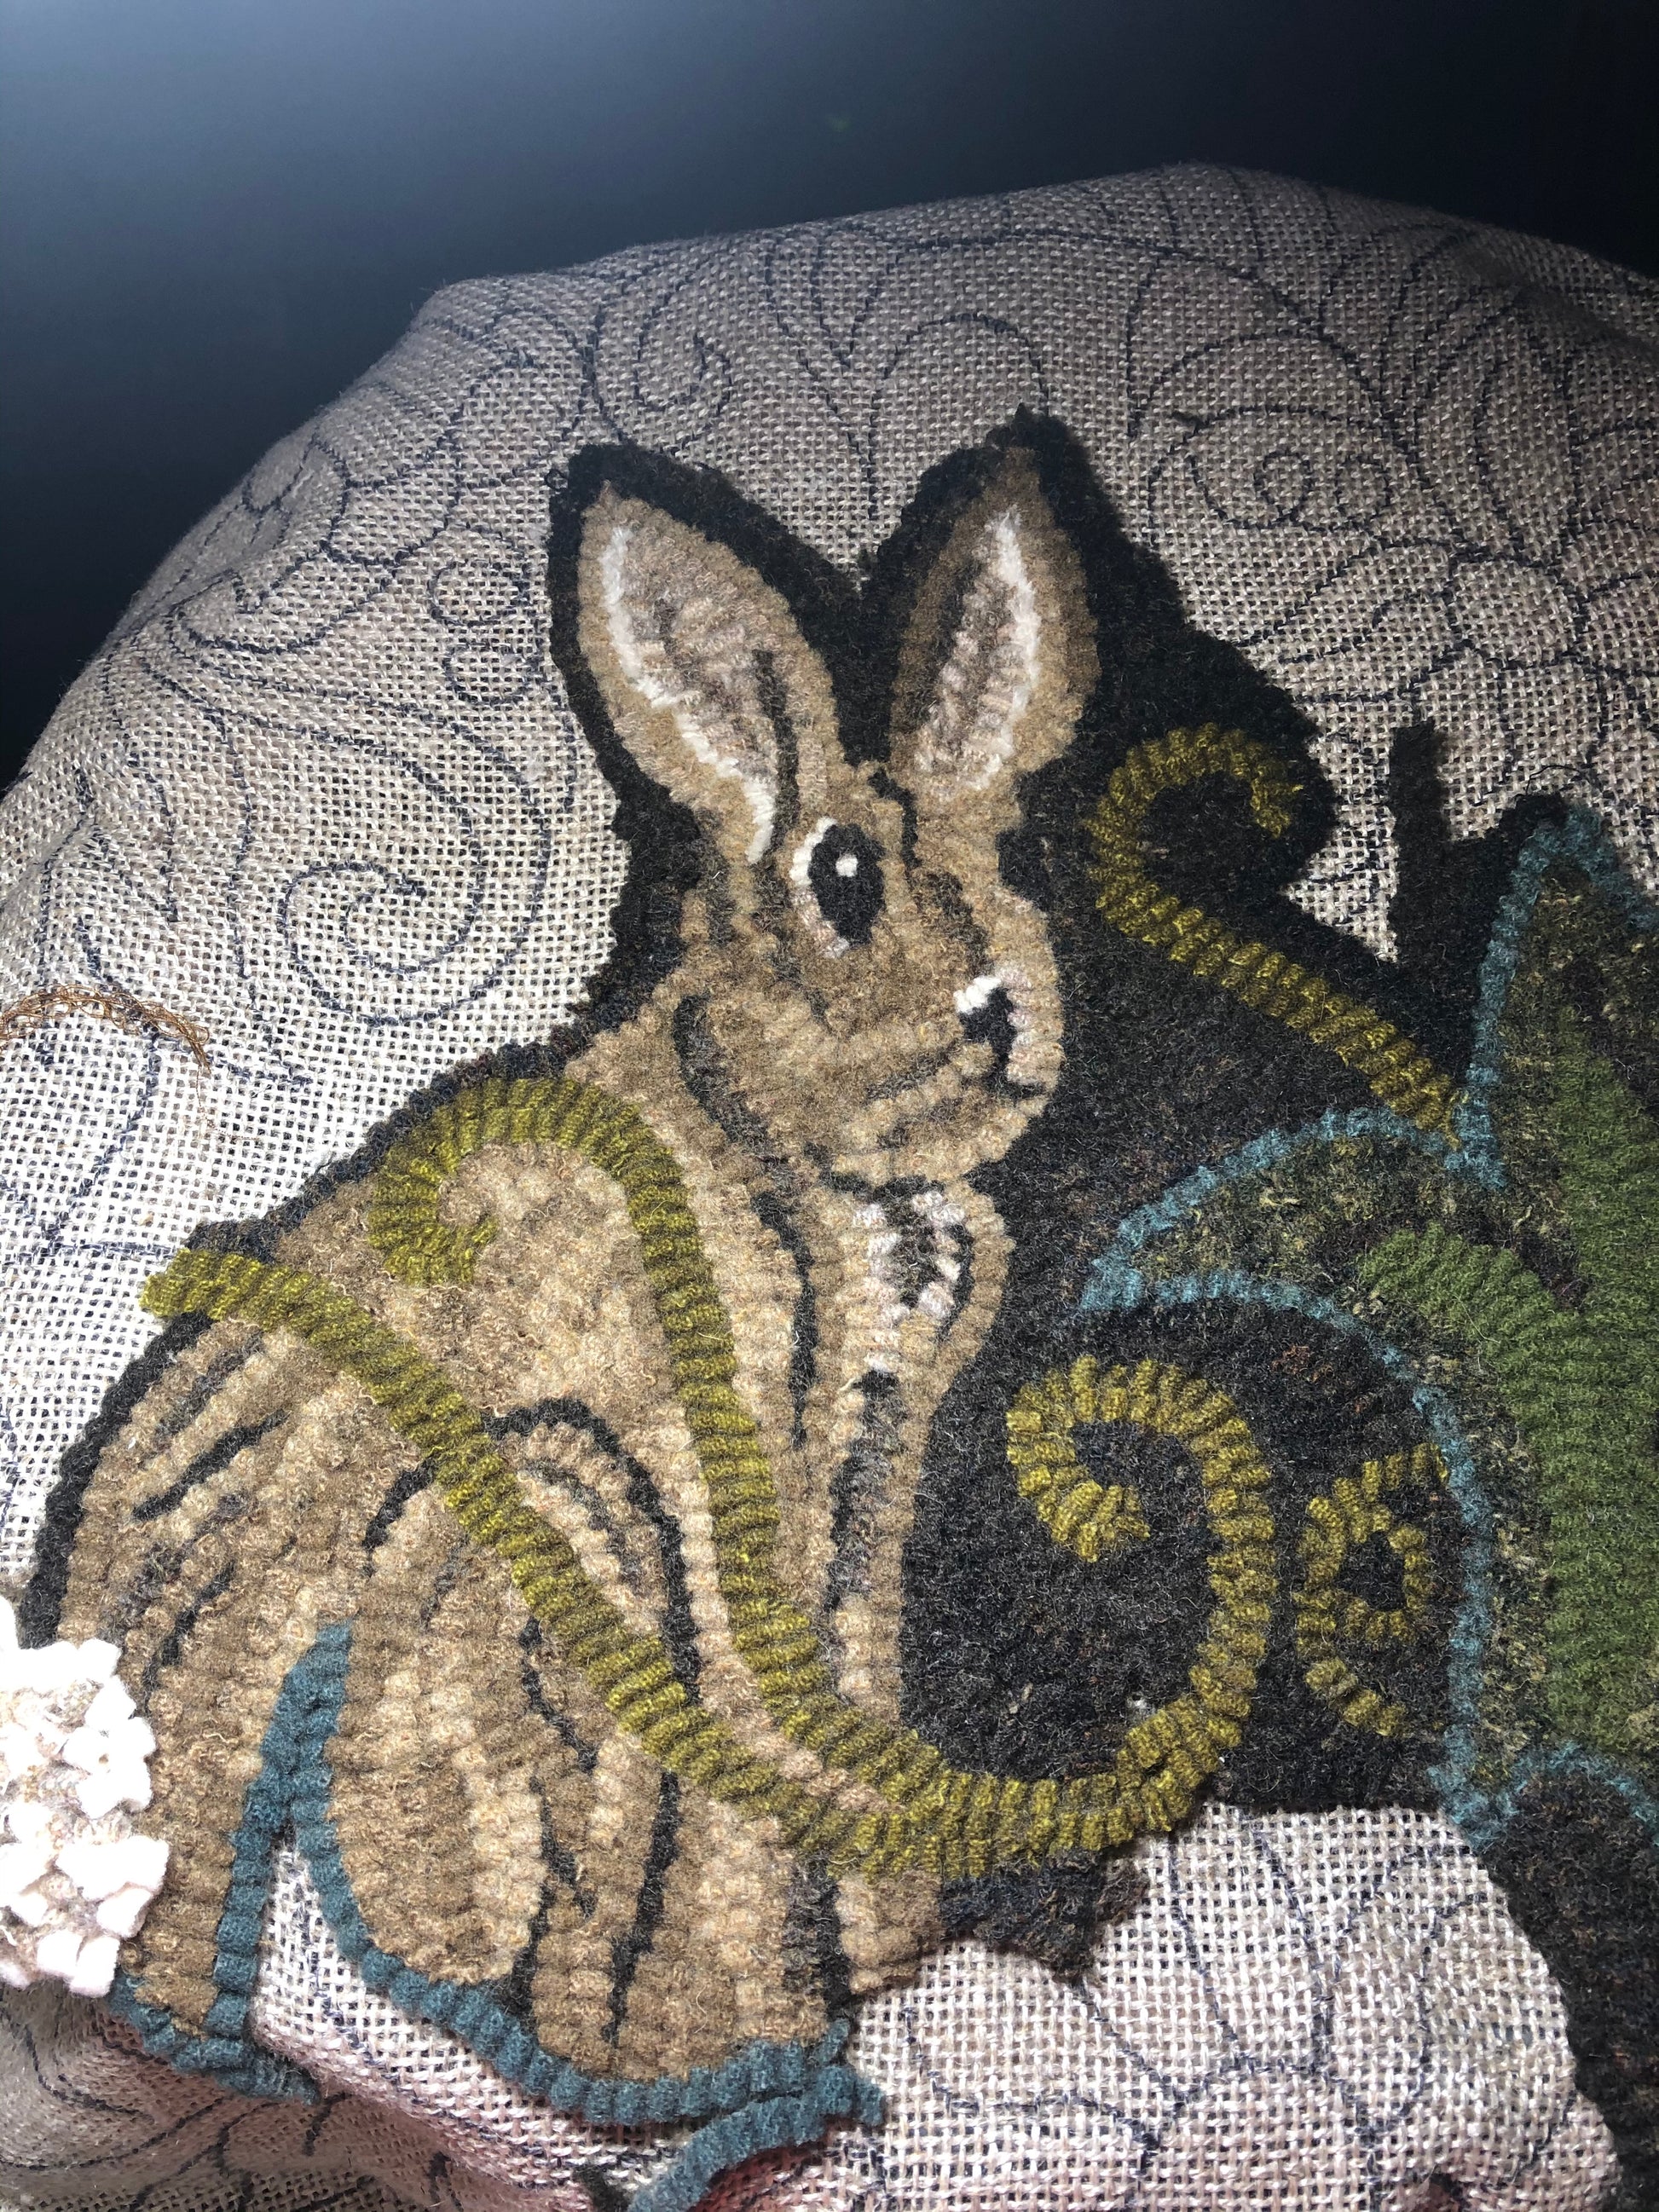 Garden Rabbit PDF Digital Download Rug Hooking Pattern, by Orphaned Wool. Beautiful Rabbit with Flowers and Leaves surrounding him. Perfect for rug hooking or rug punching with the Oxford punch Needle.